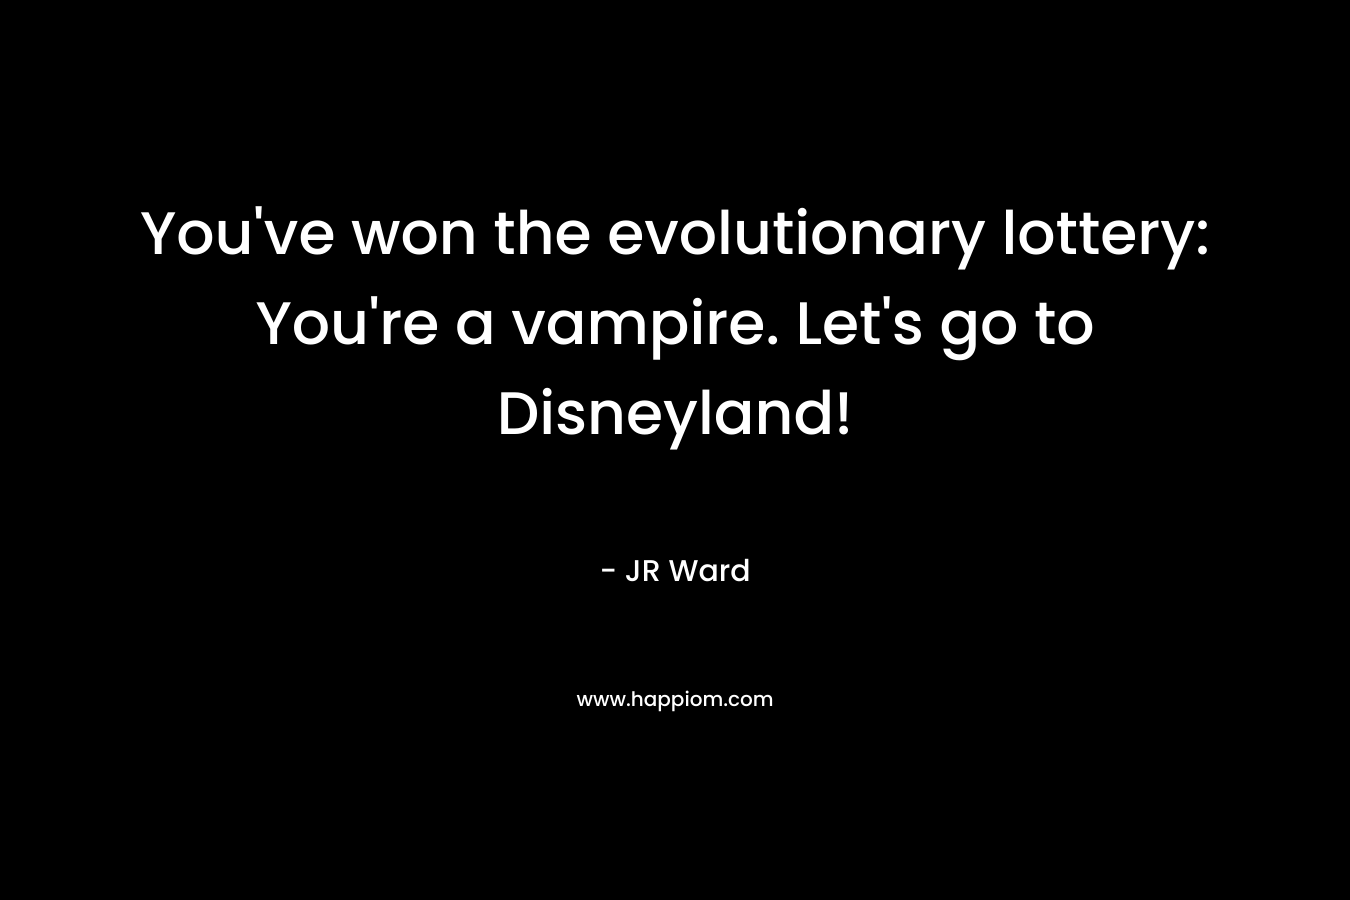 You've won the evolutionary lottery: You're a vampire. Let's go to Disneyland!